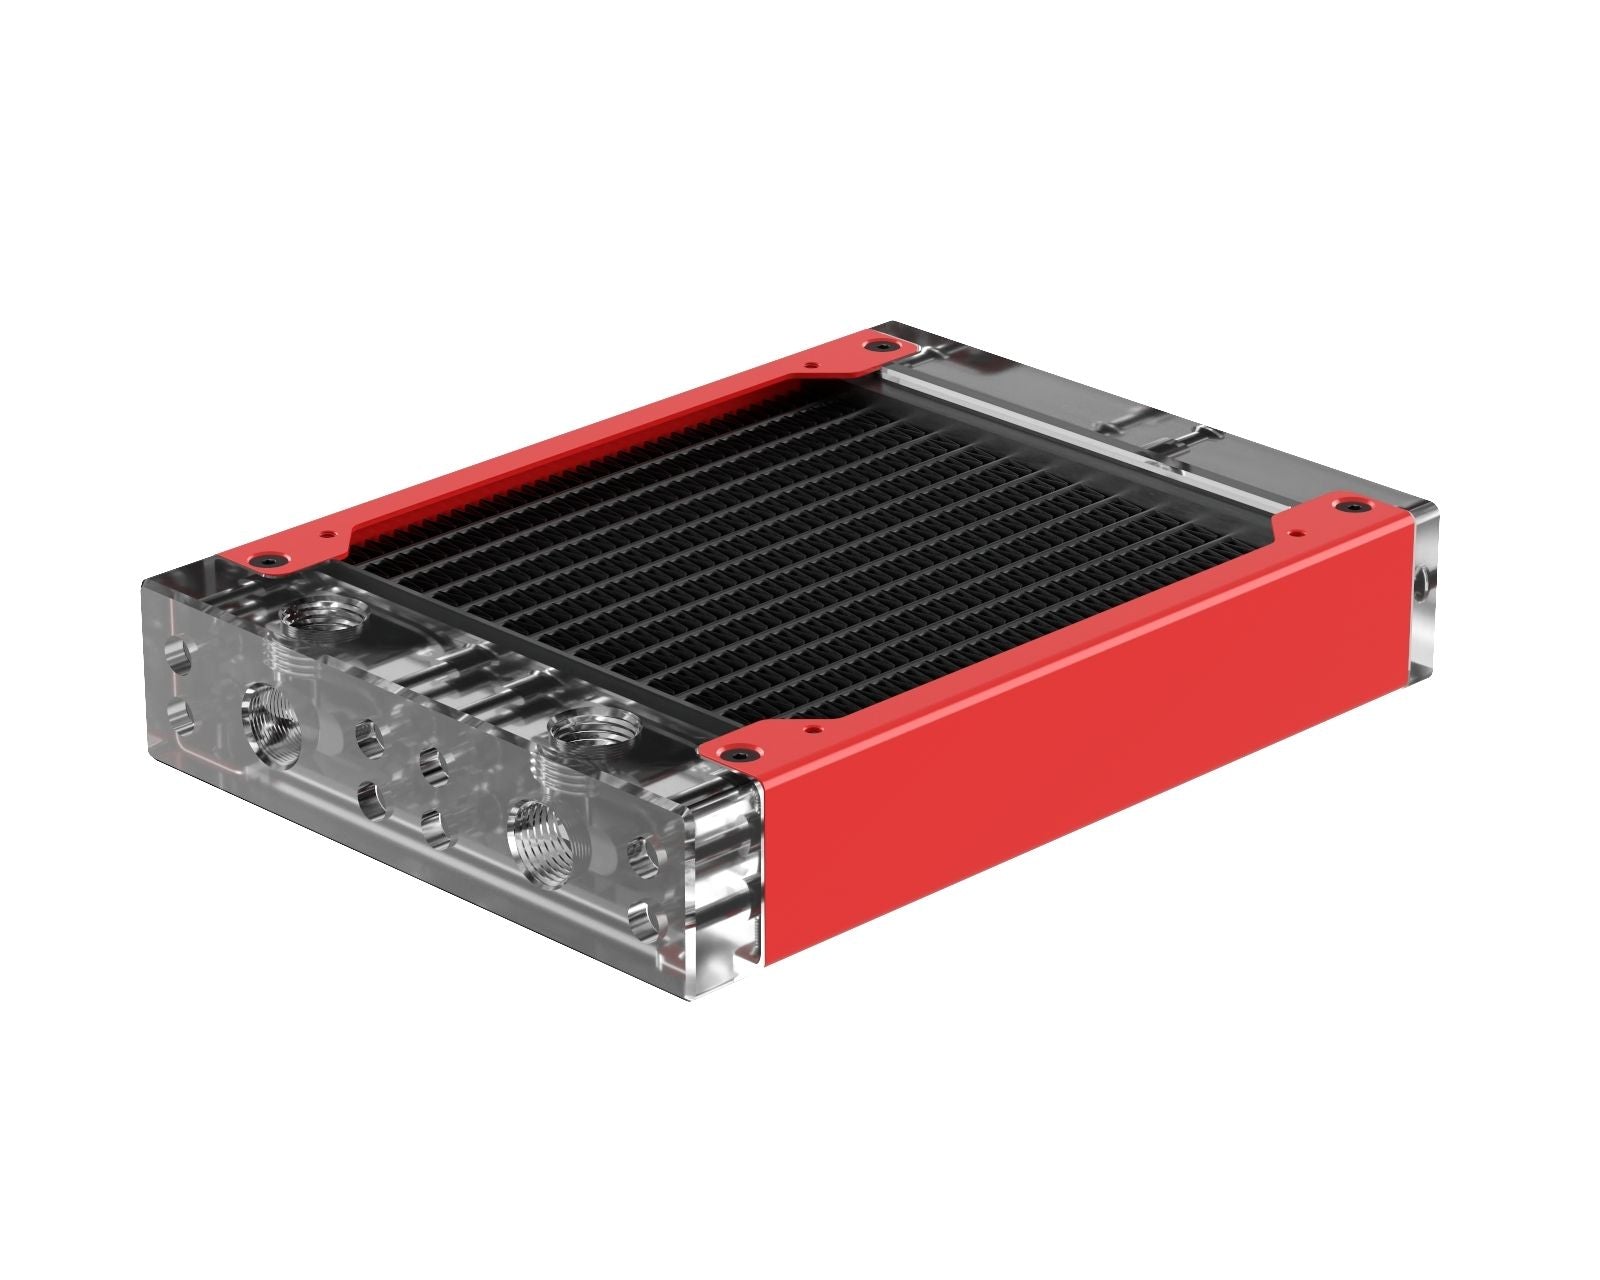 PrimoChill 120SL (30mm) EXIMO Modular Radiator, Clear Acrylic, 1x120mm, Single Fan (R-SL-A12) Available in 20+ Colors, Assembled in USA and Custom Watercooling Loop Ready - Razor Red